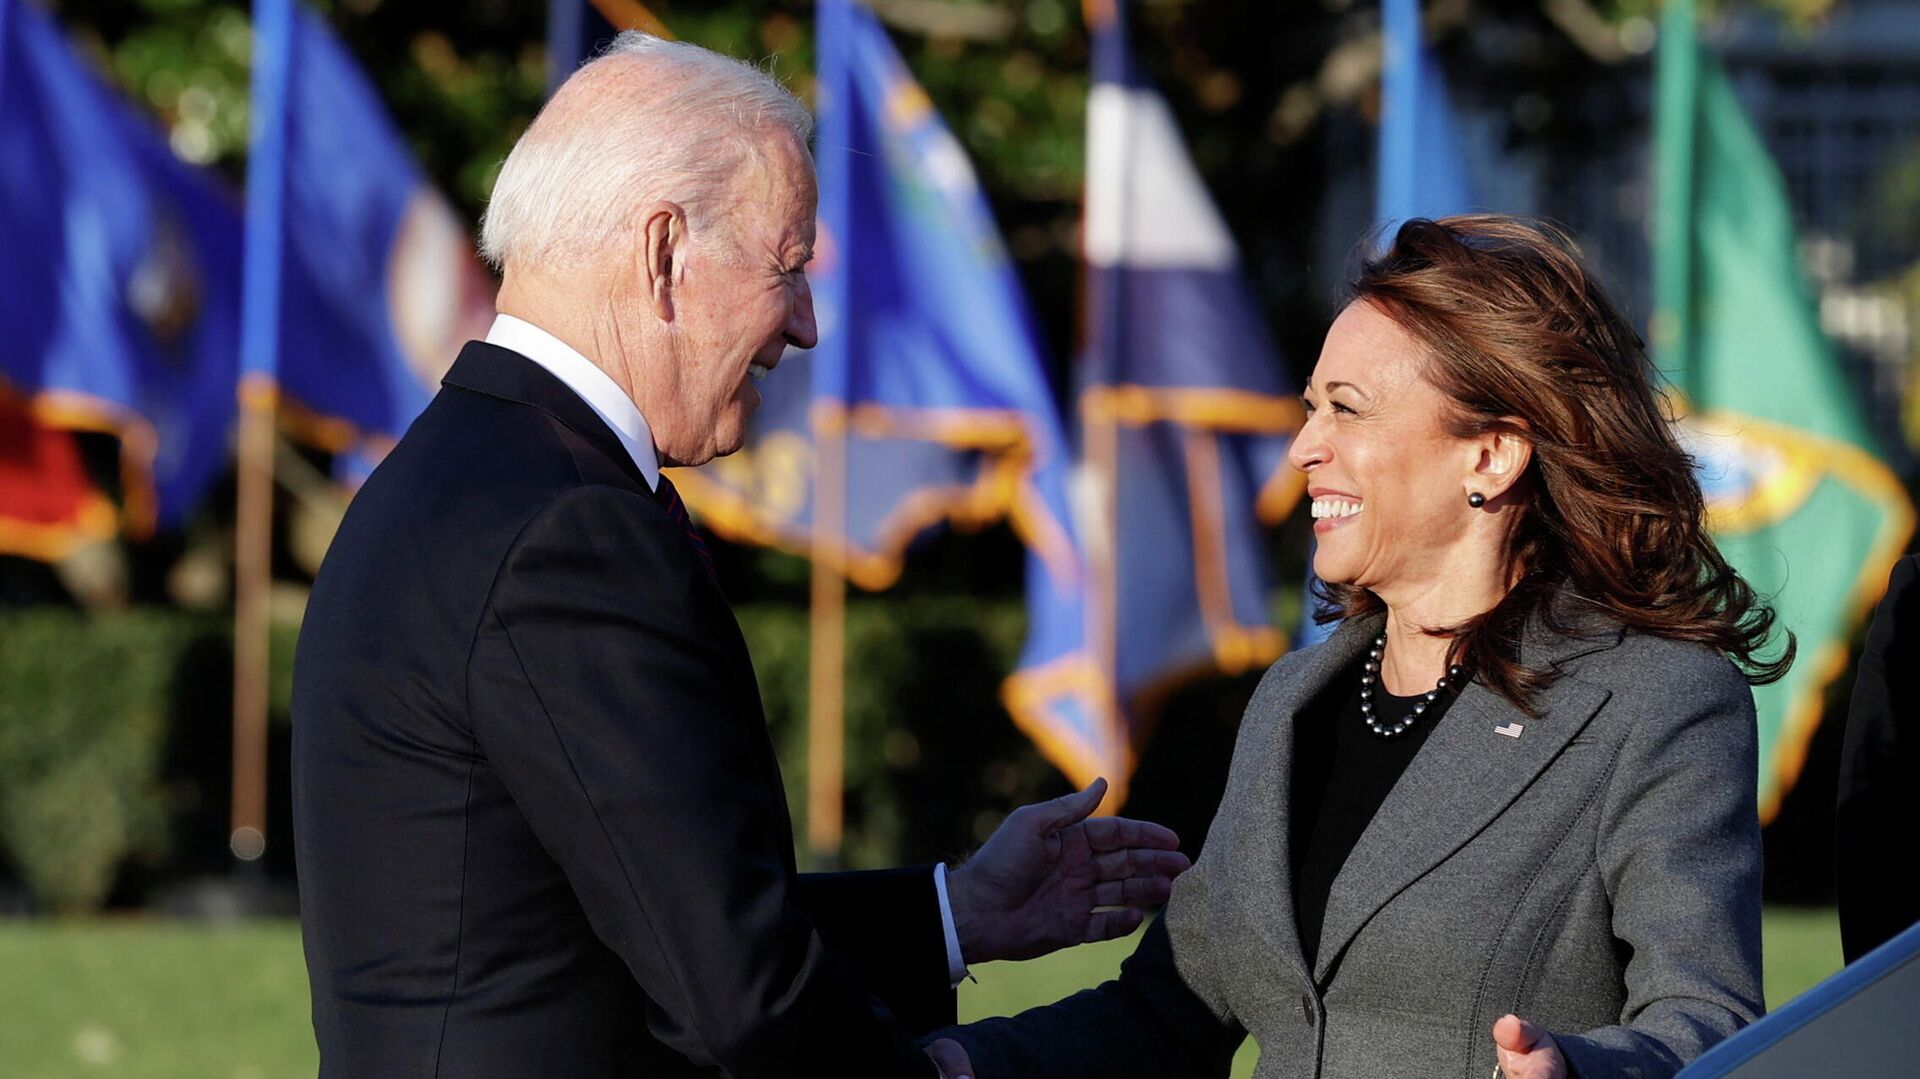 U.S. President Joe Biden and Vice-President Kamala Harris shake hands during a ceremony to sign the Infrastructure Investment and Jobs Act, on the South Lawn at the White House in Washington, U.S., November 15, 2021 - Sputnik International, 1920, 22.03.2022